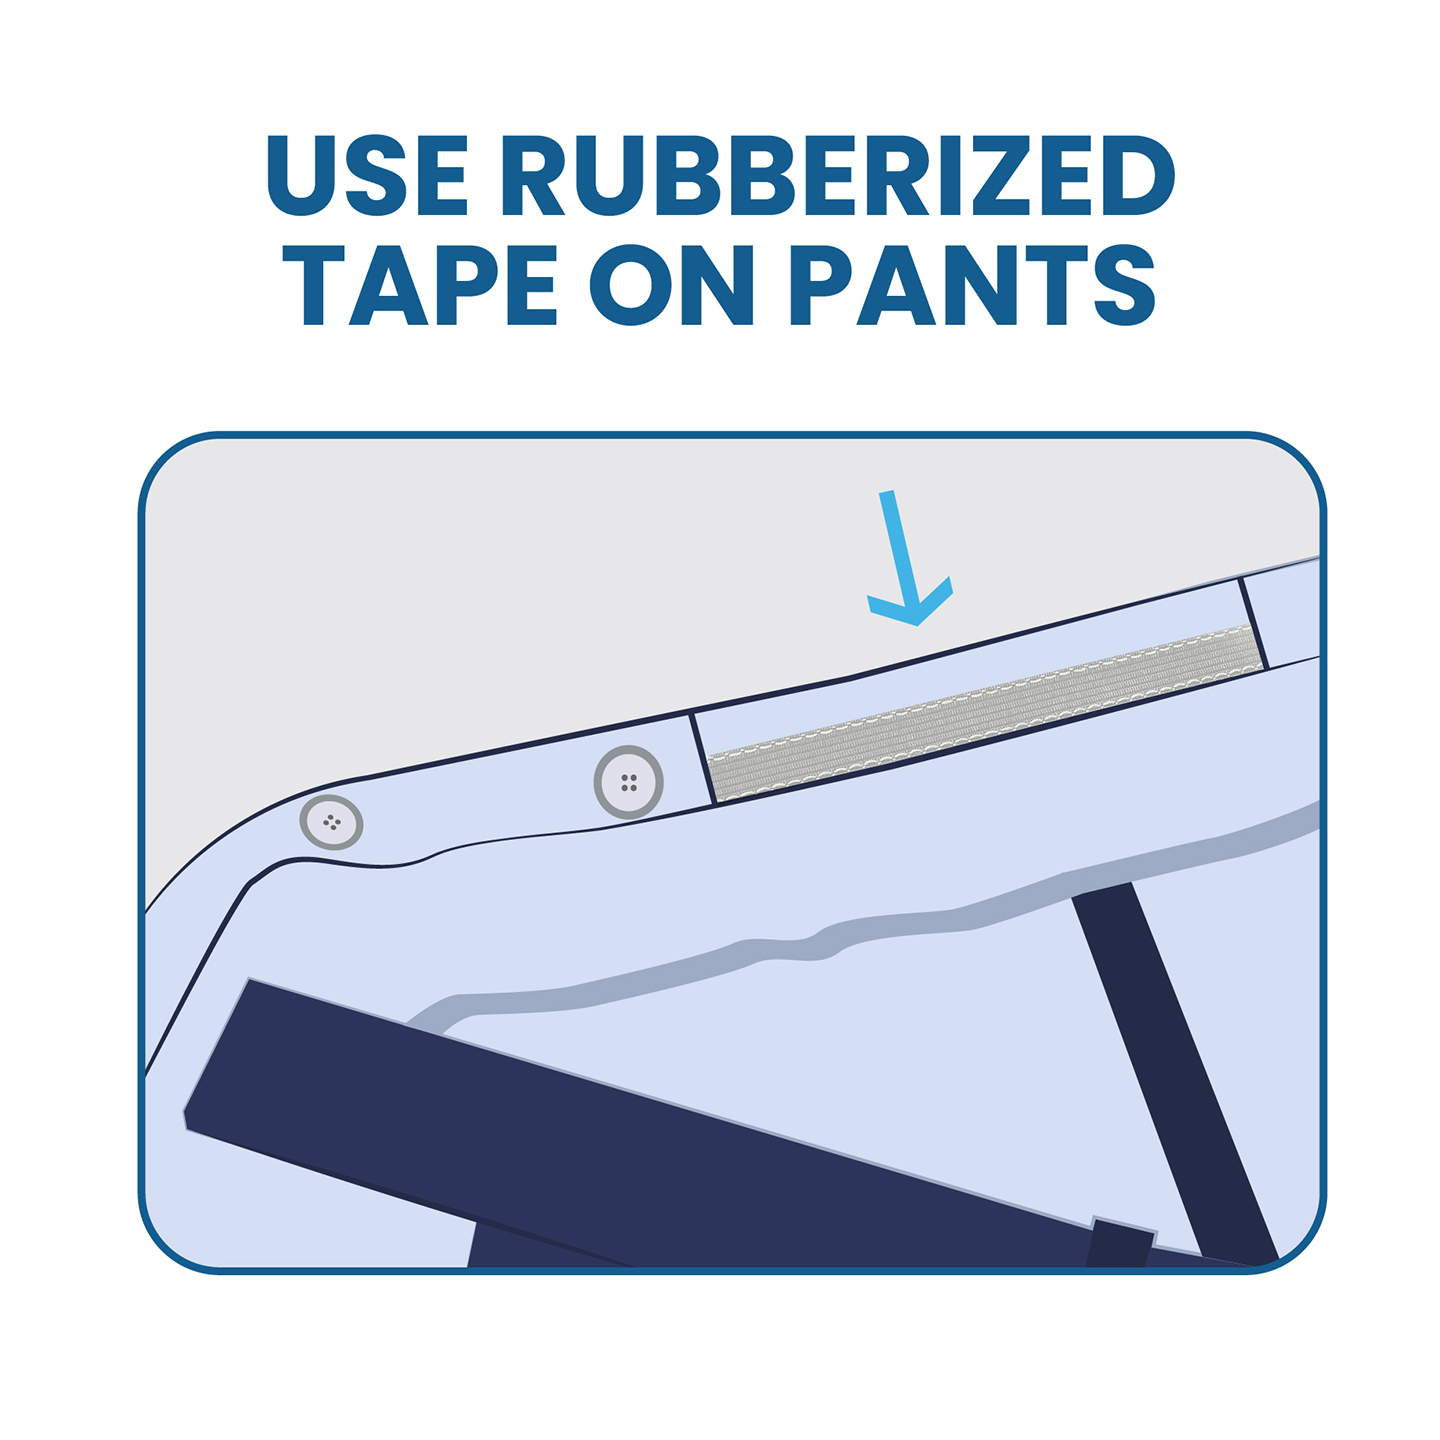 use rubberized tape on pants to keep shirt tucked in